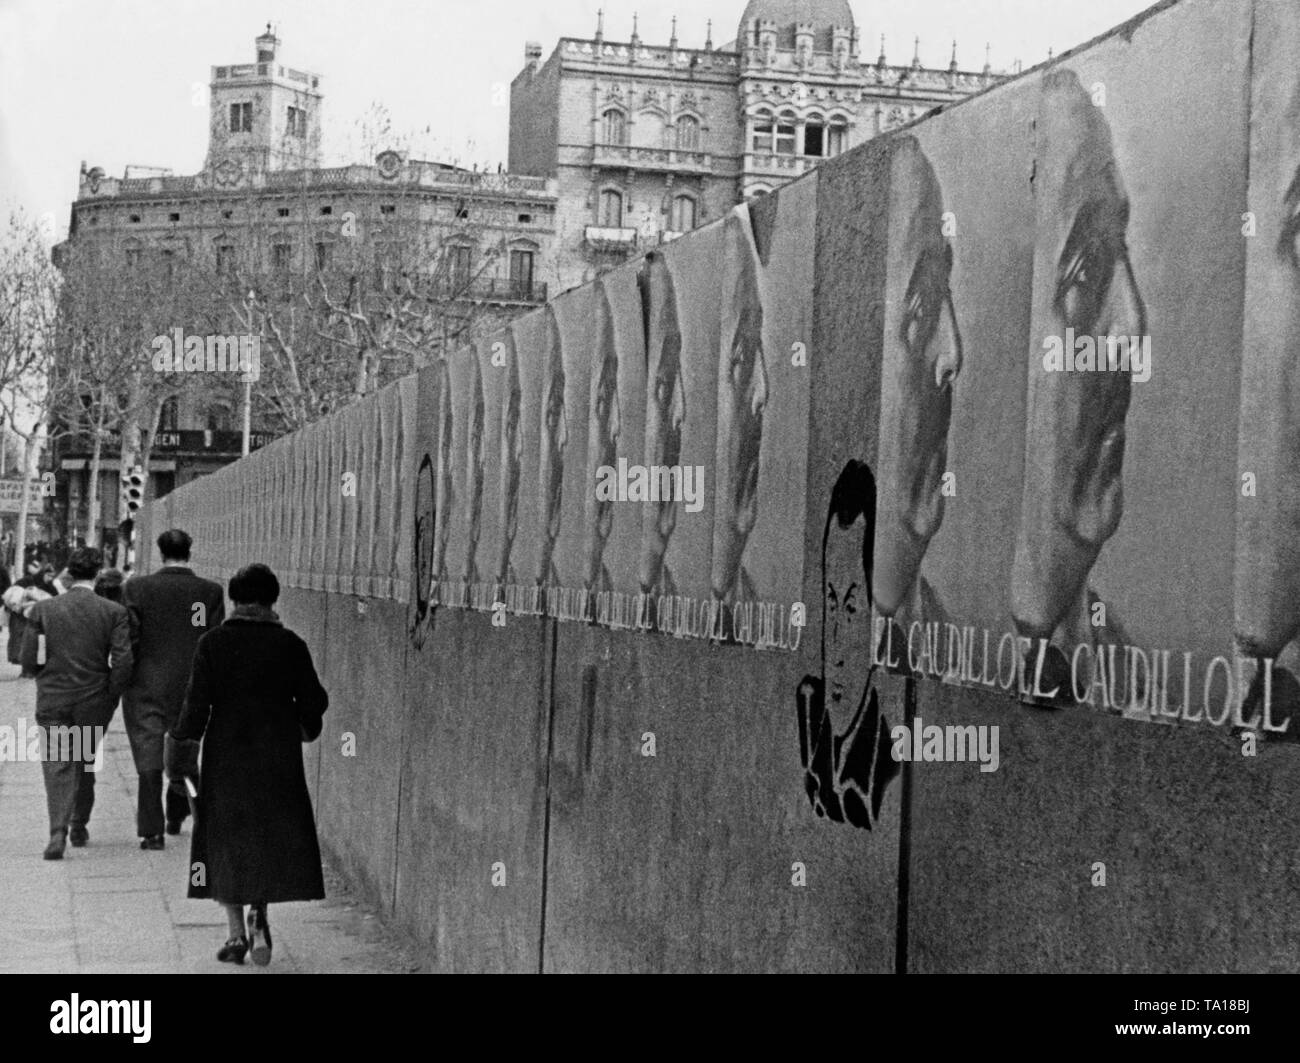 A row of propaganda posters of General Francisco Franco (Caudillo) in the center of Barcelona in February / March 1939 shortly before the end of the civil war. Stock Photo